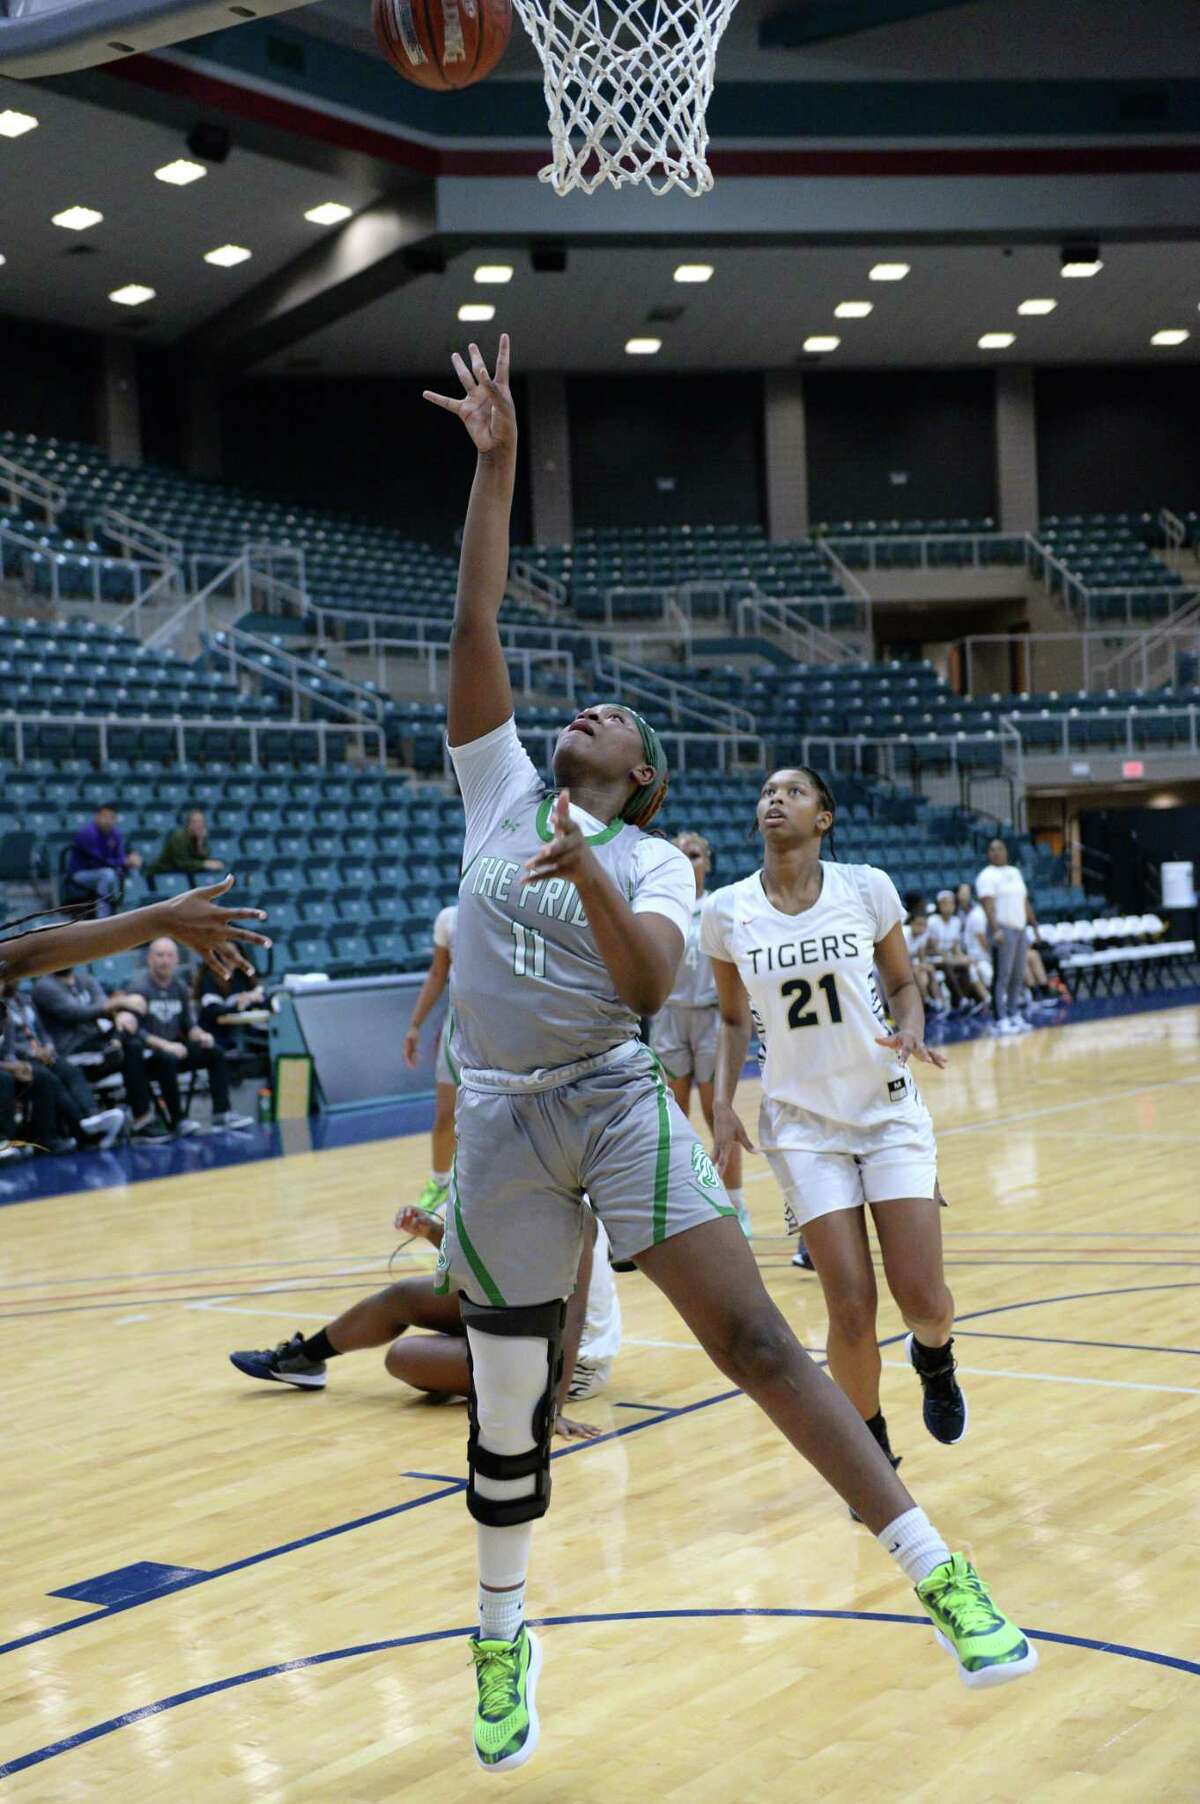 Rikeyah Gant (11) of Spring attempts a layup during the second half of a game between the Spring Lions and the Klein Collins Tigers in the Katy ISD Basketball Classic on Friday, December 3, 2021 at the Leonard Merrill Center, Katy, TX.